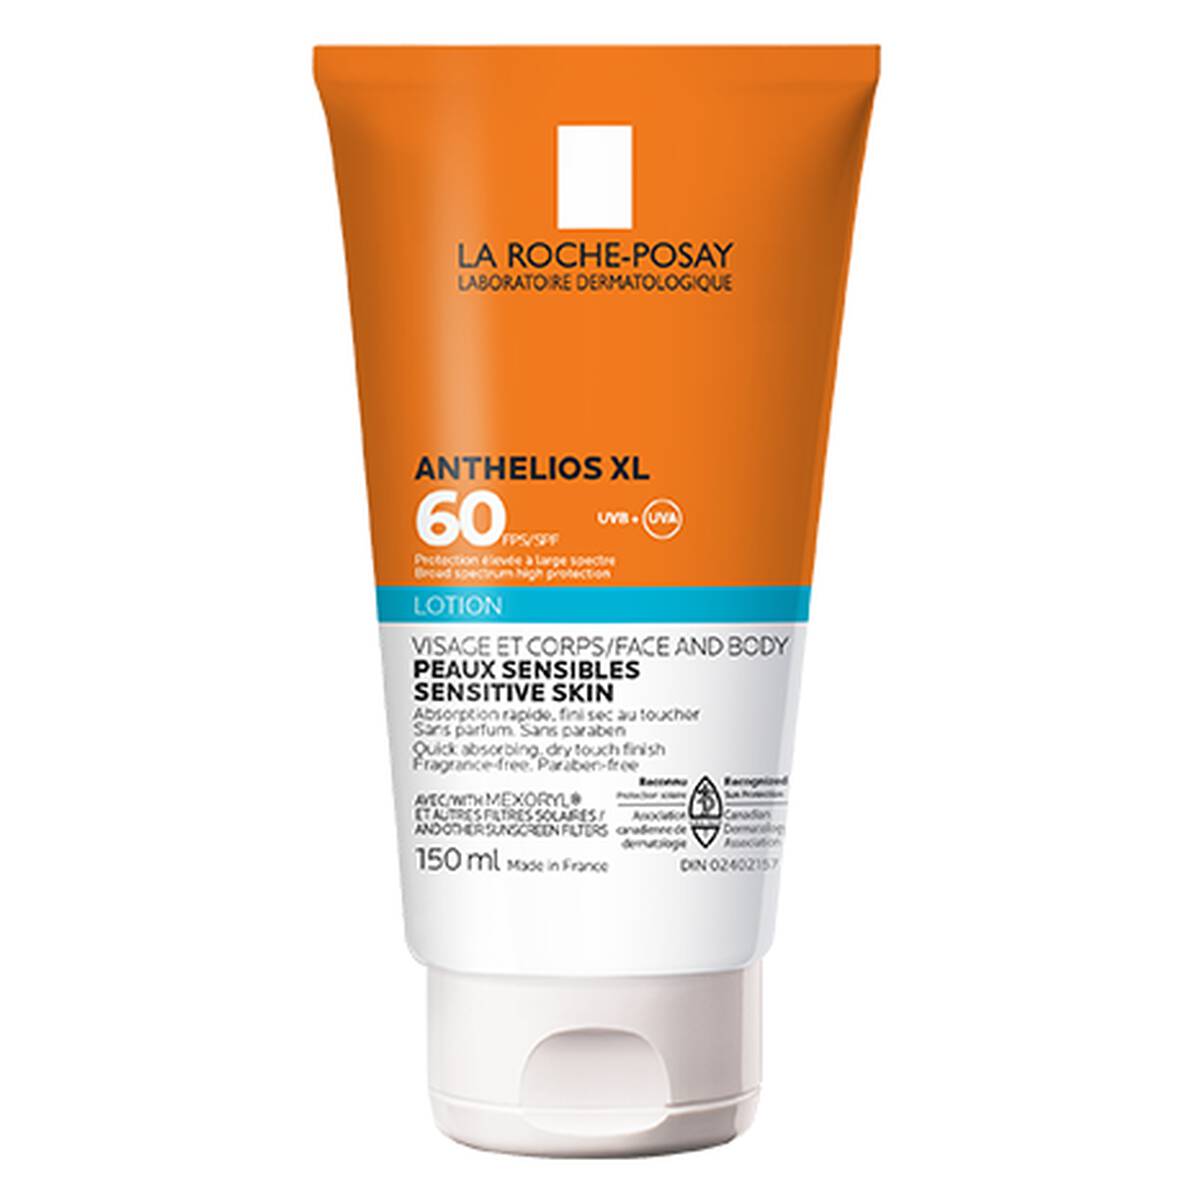 Anthelios Lotion SPF 60 Sunscreen for Face and Body (150ml)